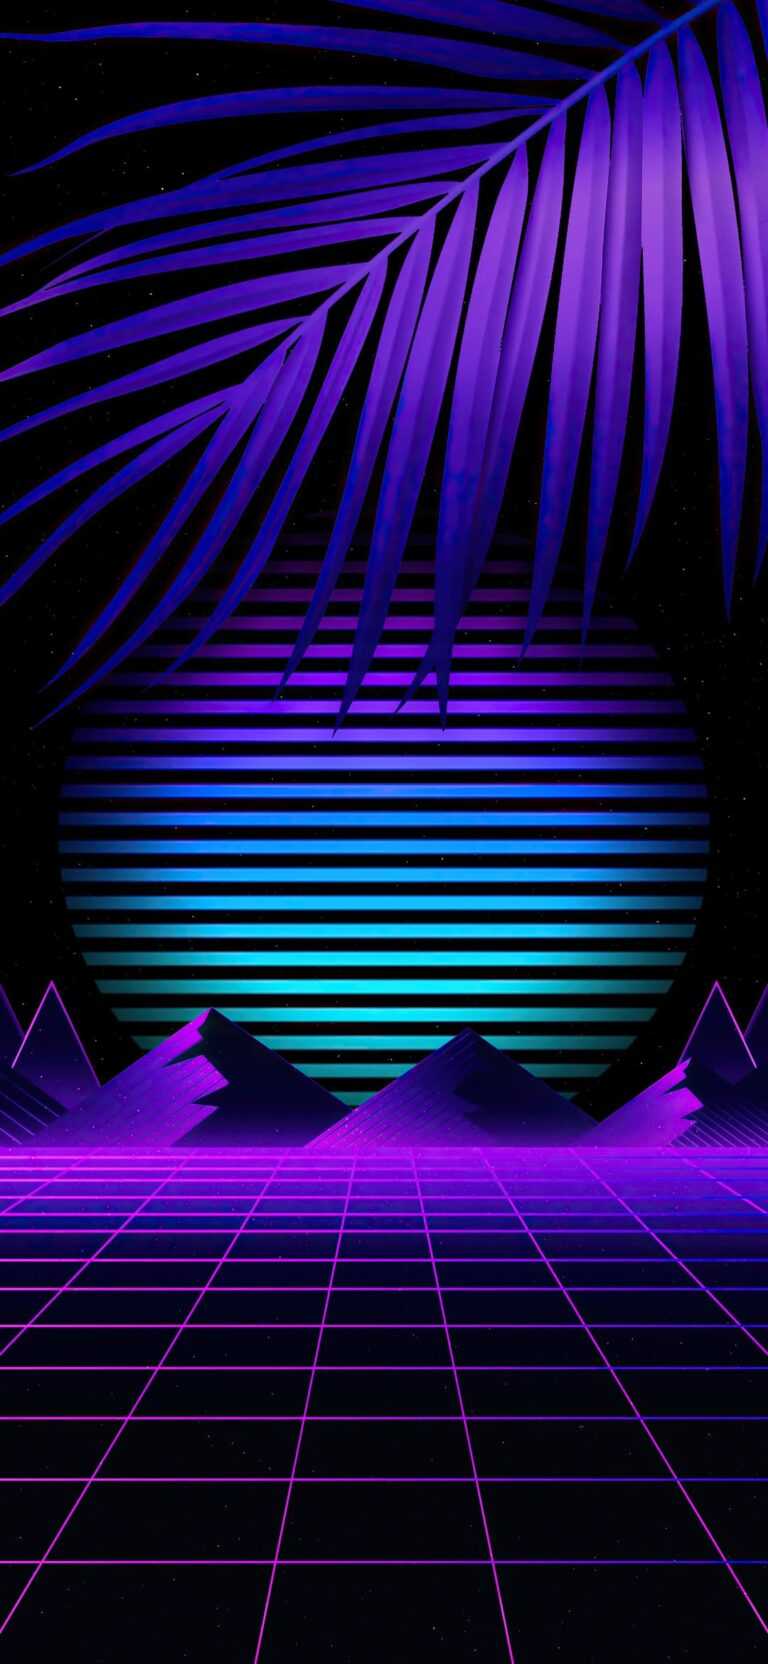 Synthwave IPhone Wallpaper - iXpap